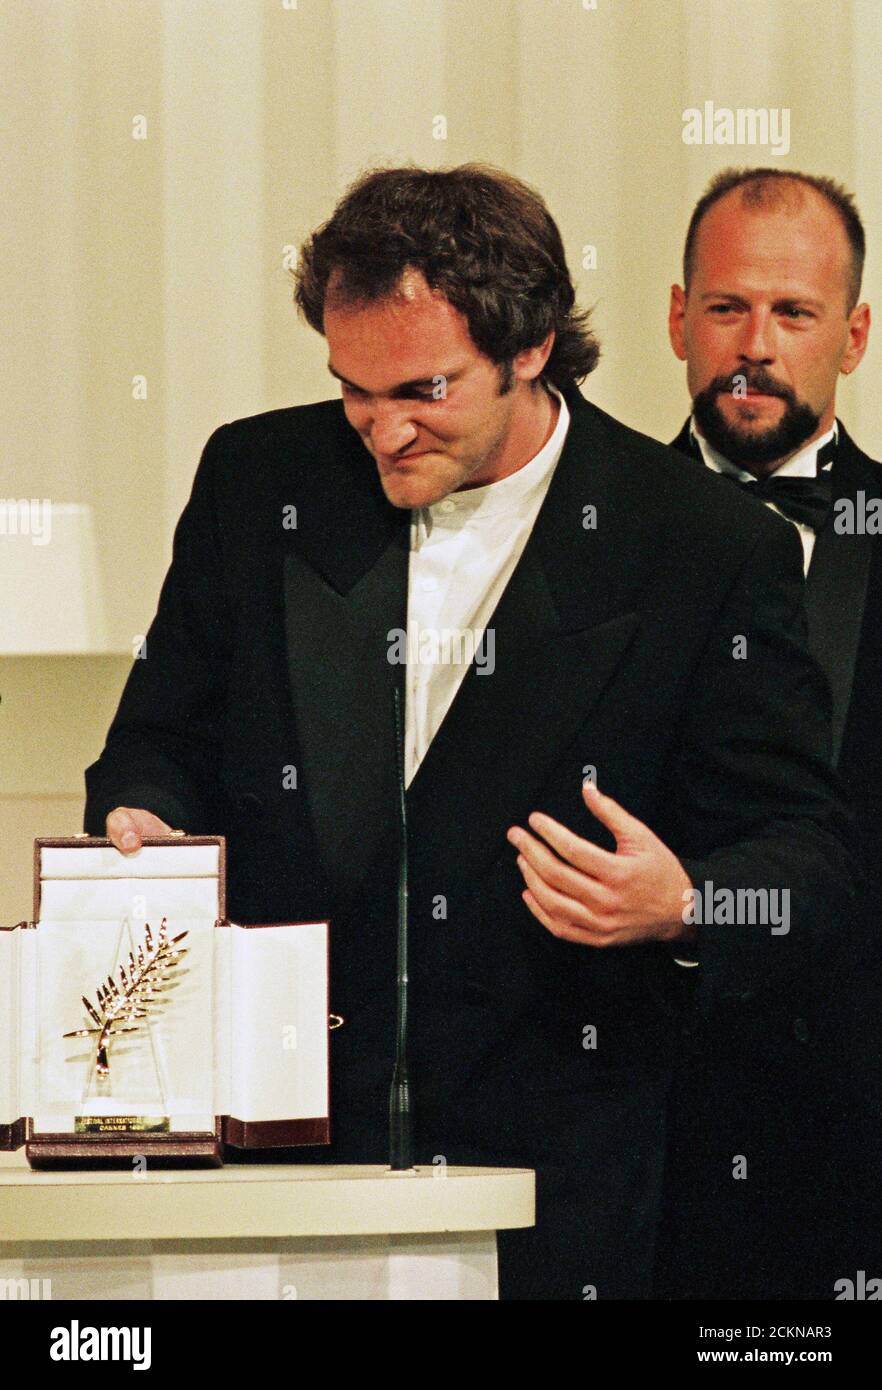 Director Quentin Tarantino reacts after winning the Palme d'Or award for  his film "Pulp Fiction" as actor Bruce Willis looks on during the closing  ceremony at the 47th Cannes Film Festival, in